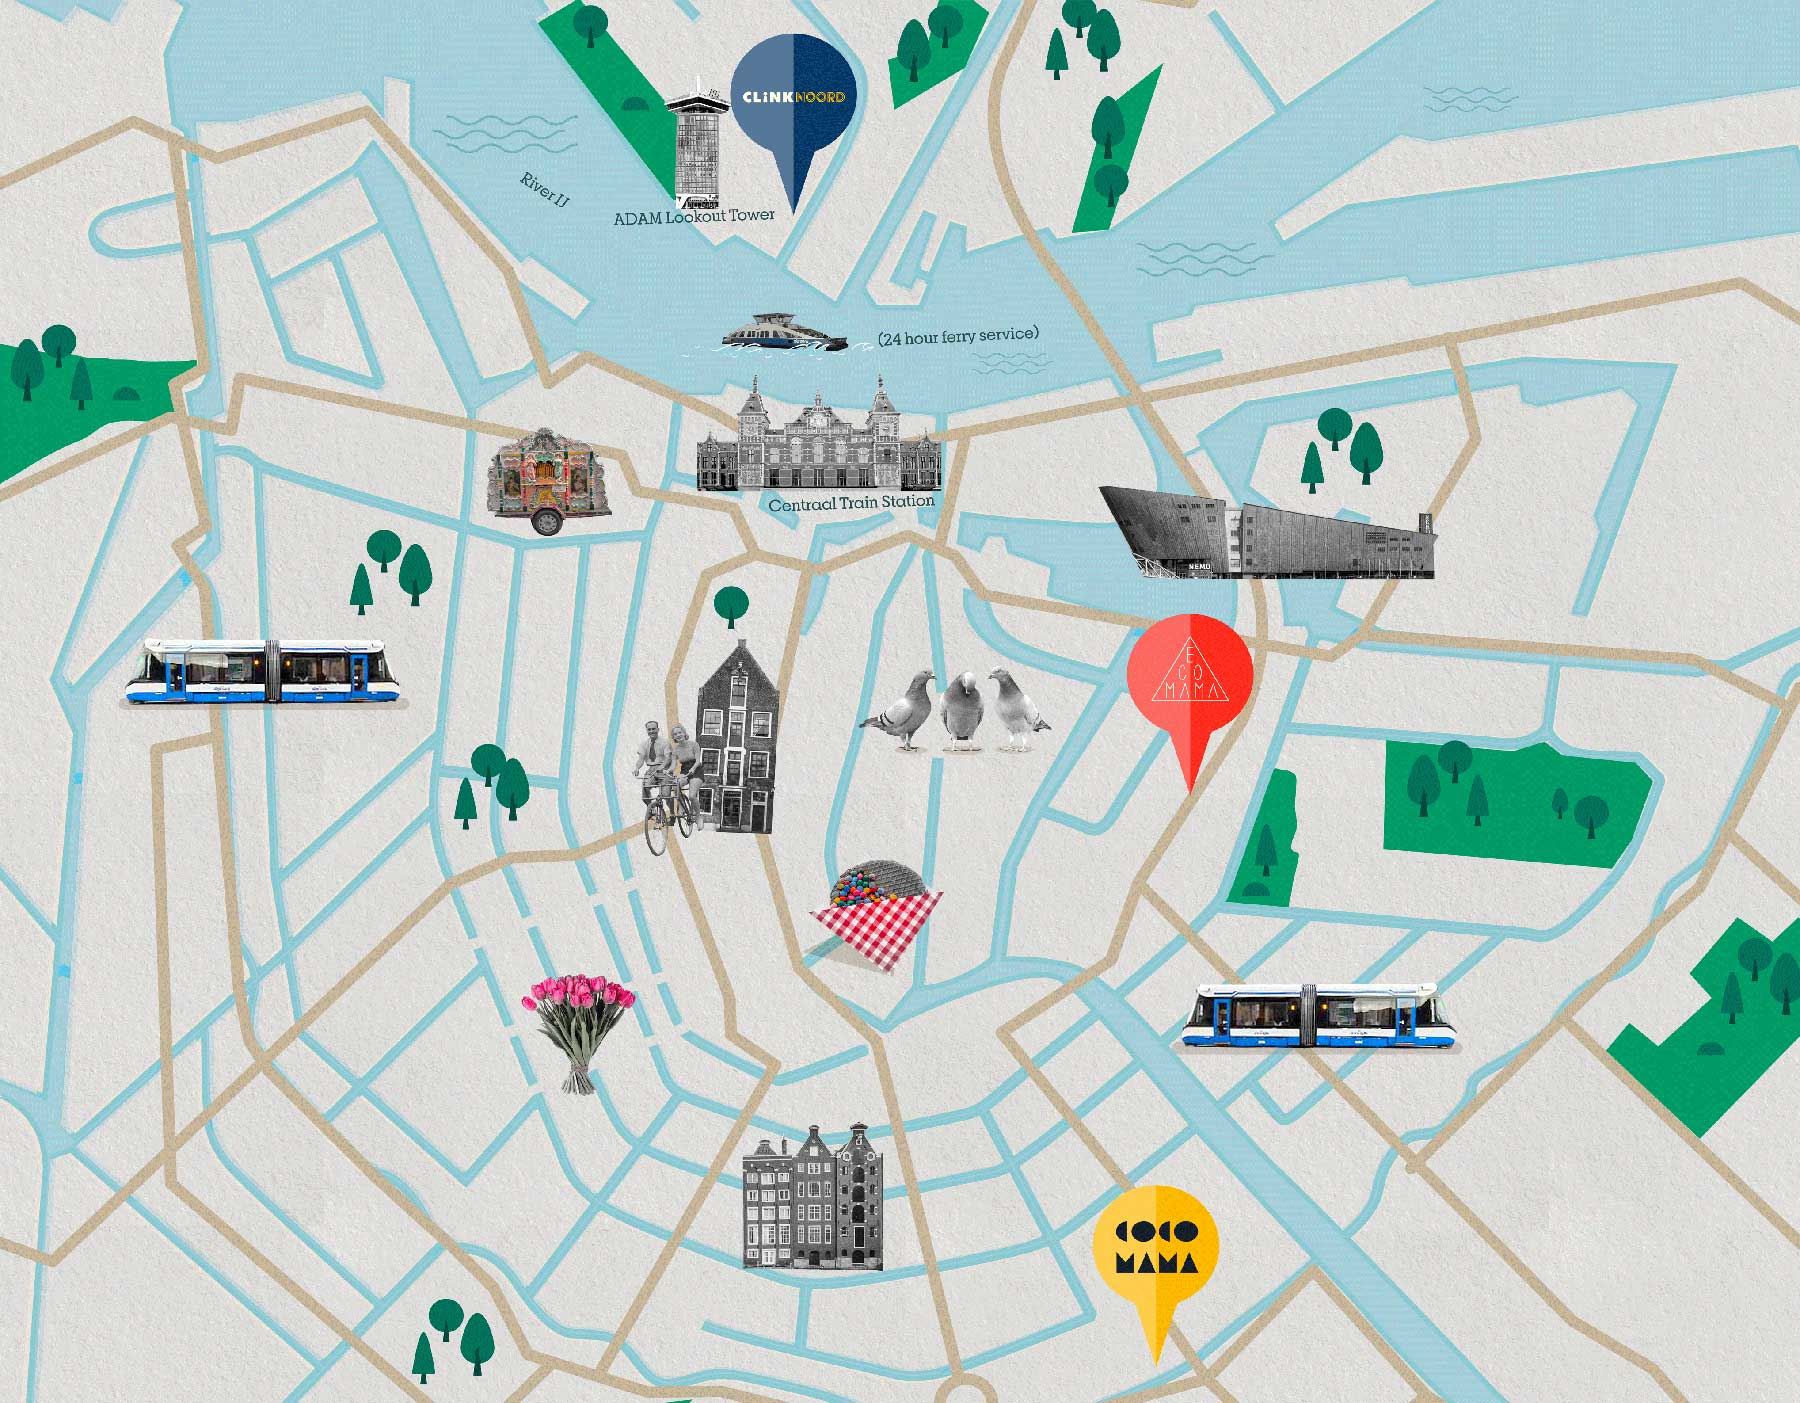 Amsterdam city map with ClinkNOORD, Ecomama, Cocomama and tourist attractions